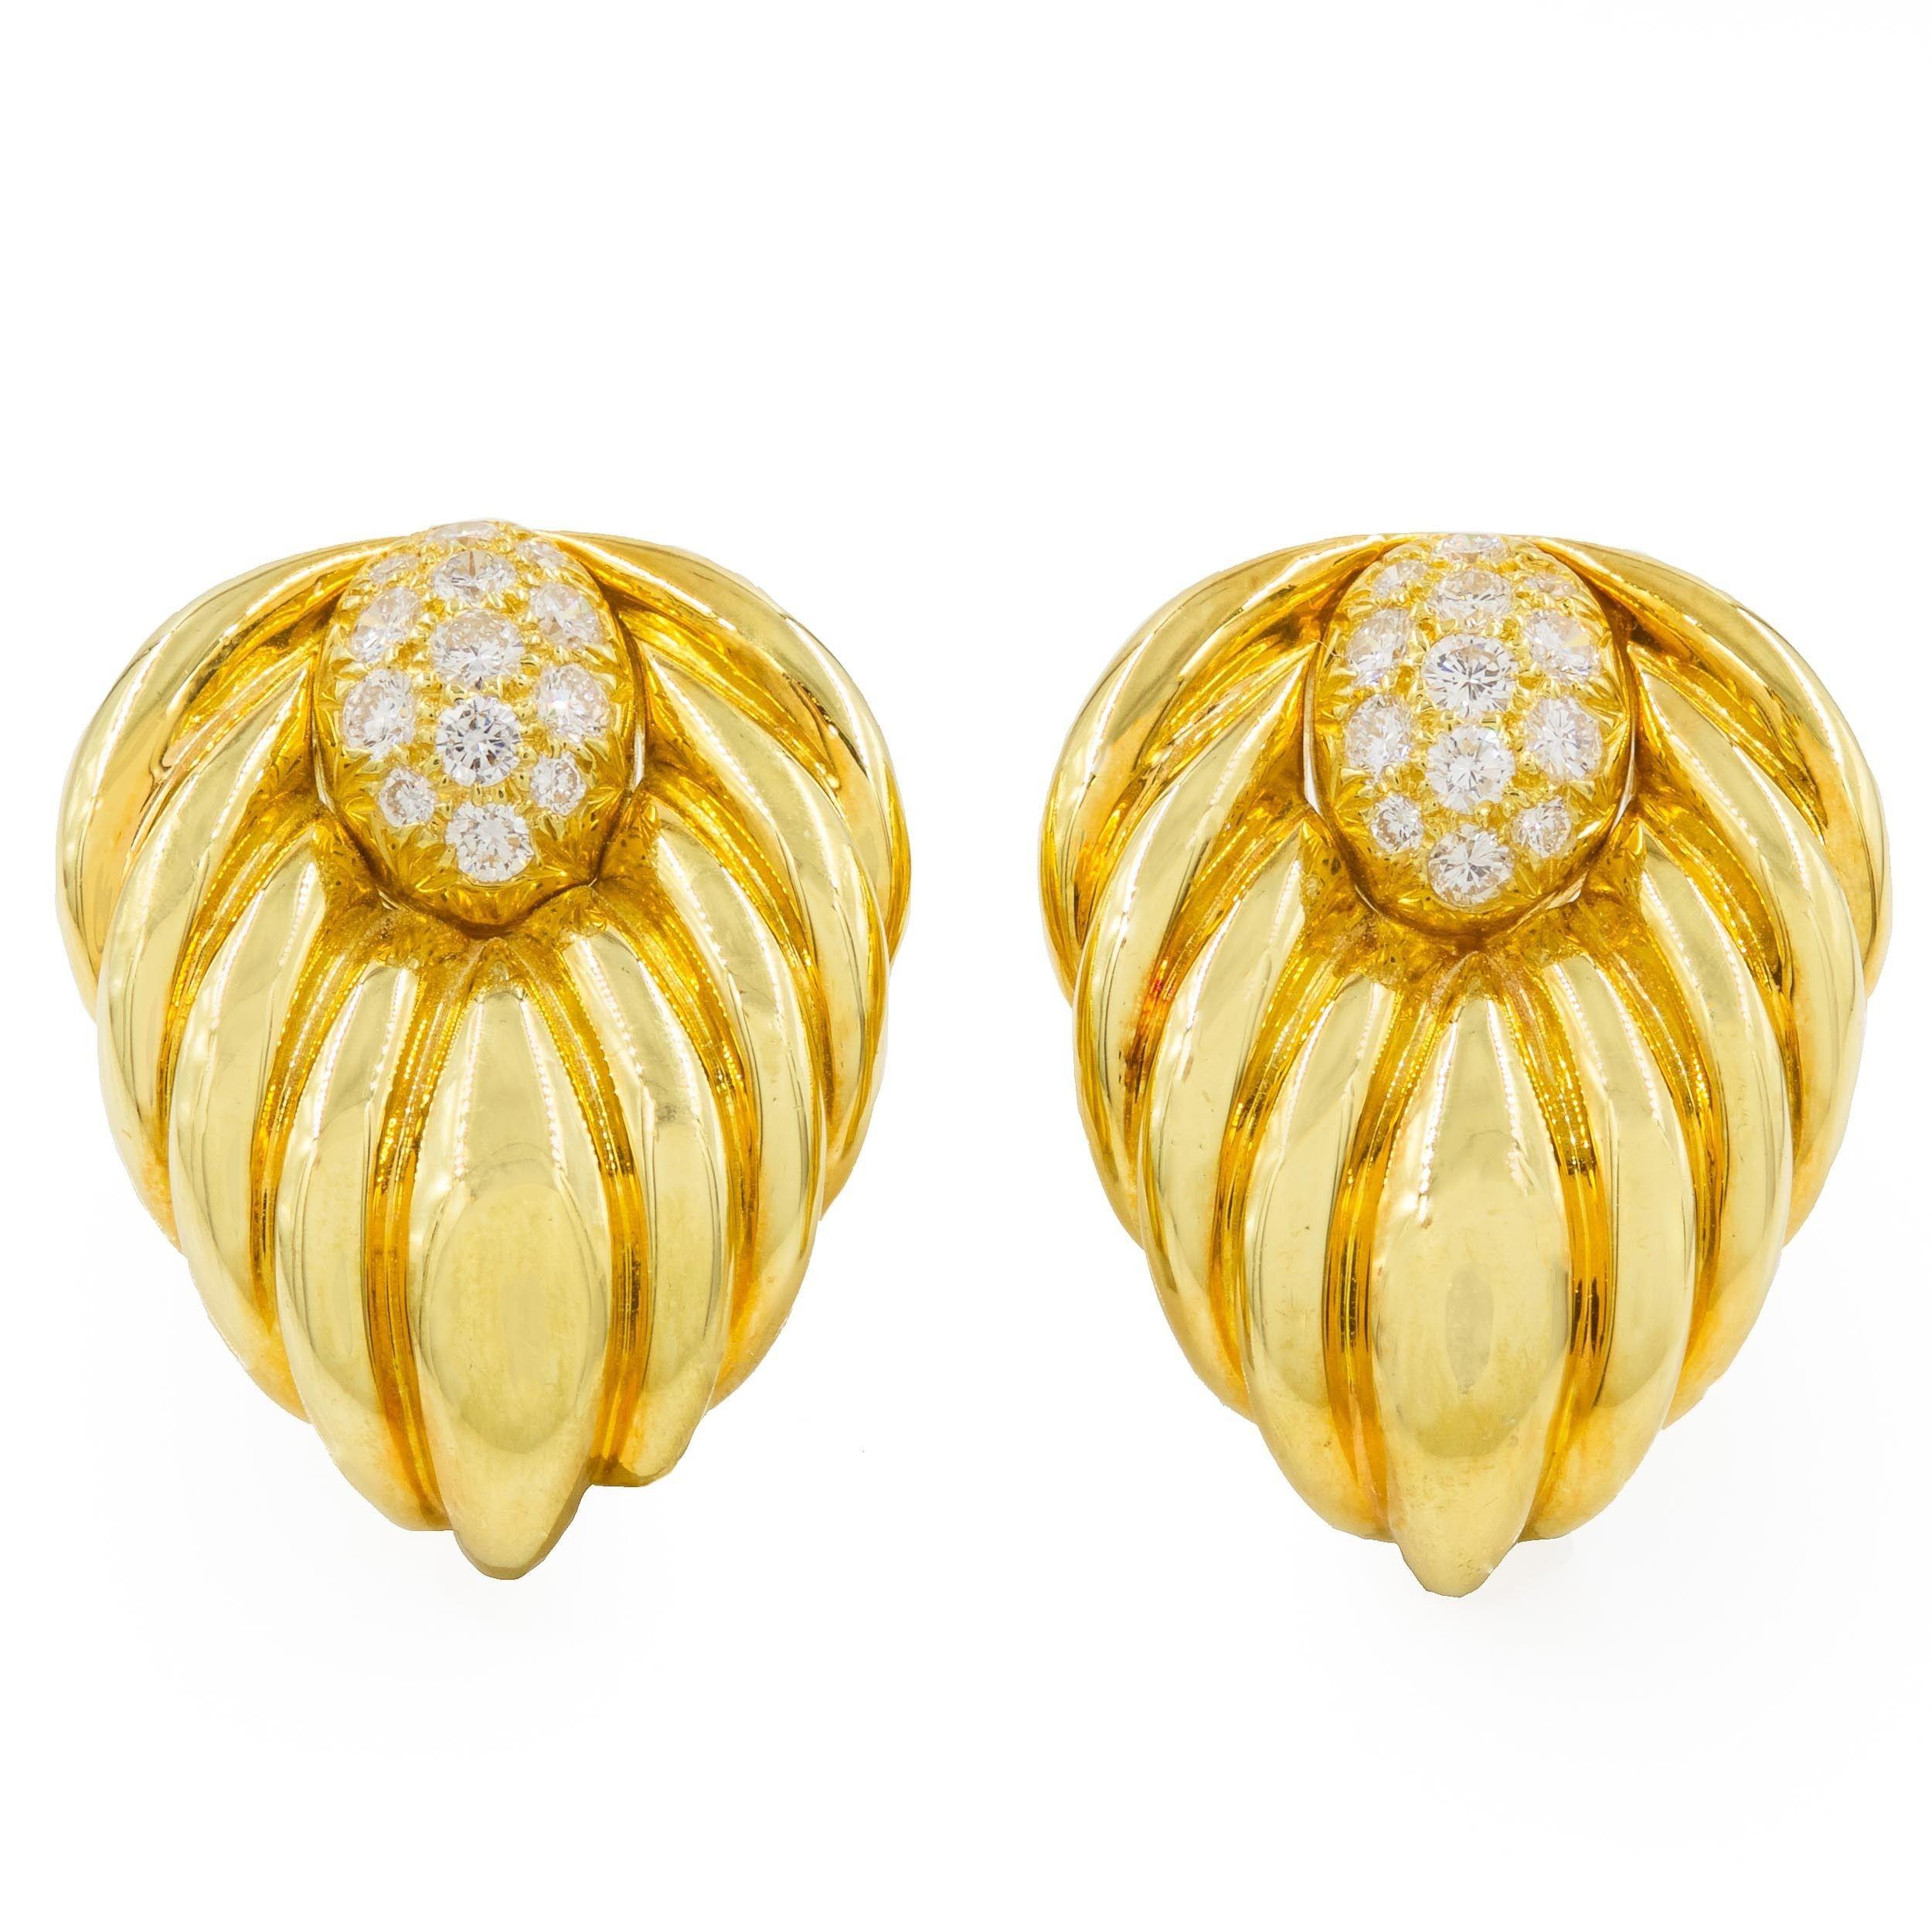 A PAIR OF 18K YELLOW GOLD LOBED DIAMOND EARRINGS
Designed by Albert Lipton, sealed with his cachet to the reverse of the clip  26 round brilliant-cut diamonds
Item # C104251 

A substantial and incredibly fine pair of earrings by the landmark